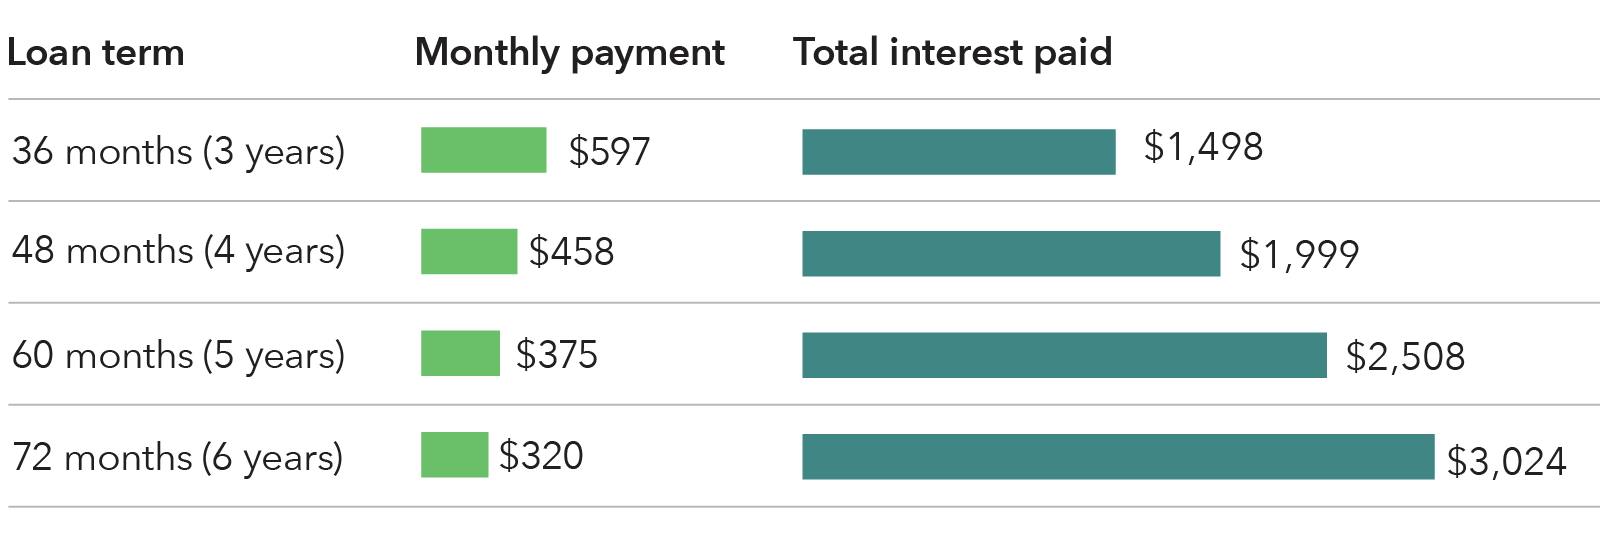 Chart showing monthly payments and total interest for different loan terms